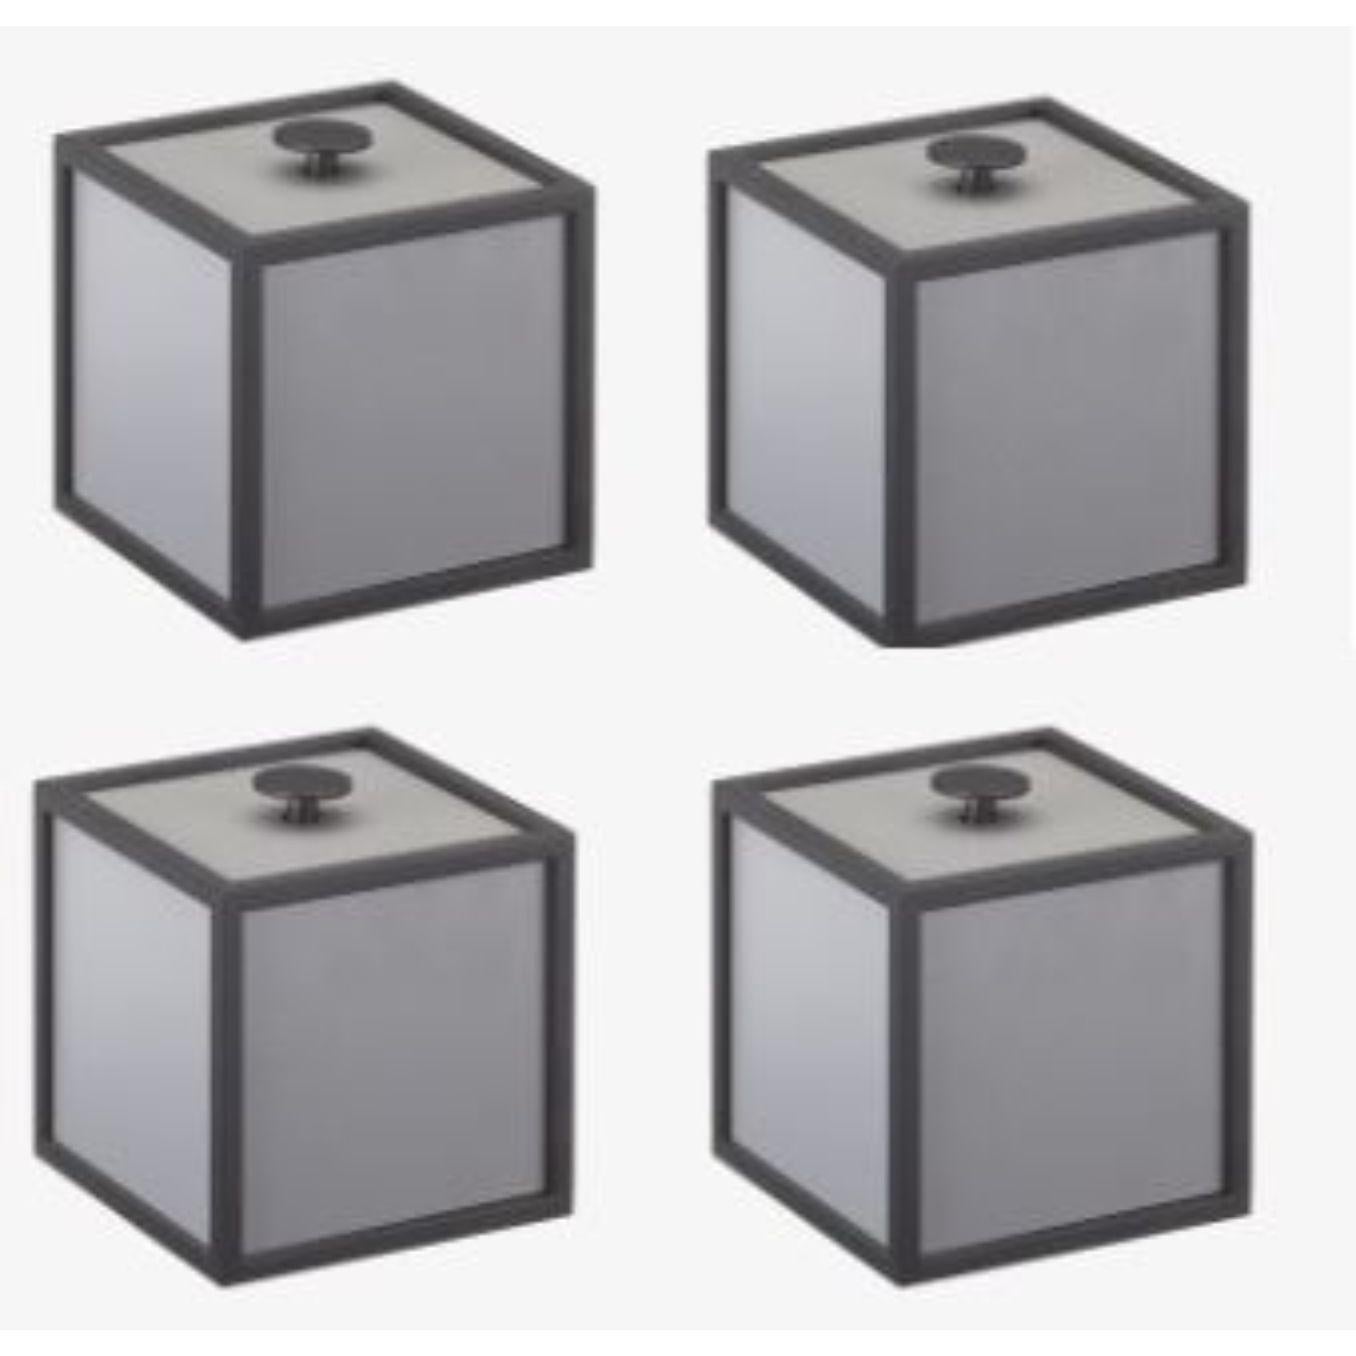 Set of 4 dark grey frame 10 box by Lassen
Dimensions: D 10 x W 10 x H 10 cm 
Materials: finér, melamin, melamine, metal, veneer
Weight: 0.85 Kg

Frame Box is a square box in a cubistic shape. The simple boxes are inspired by the Kubus